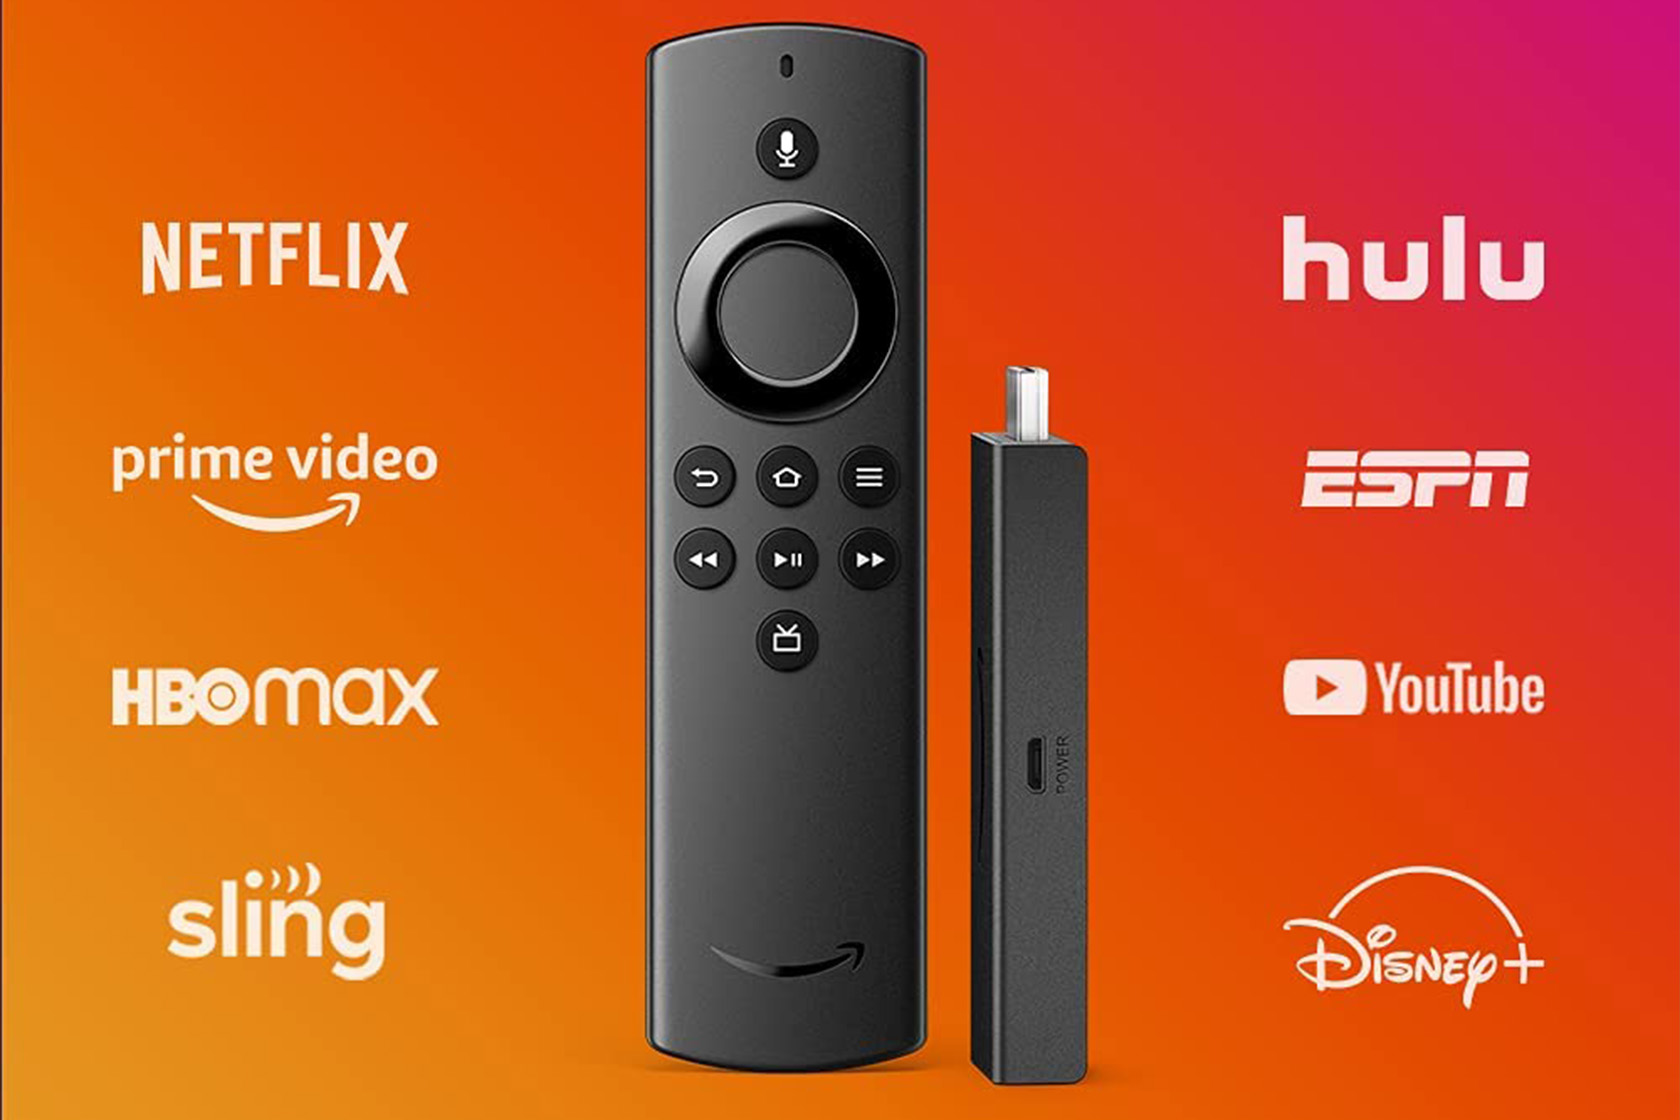 s Fire Stick Lite is an historically low $12 price ahead of